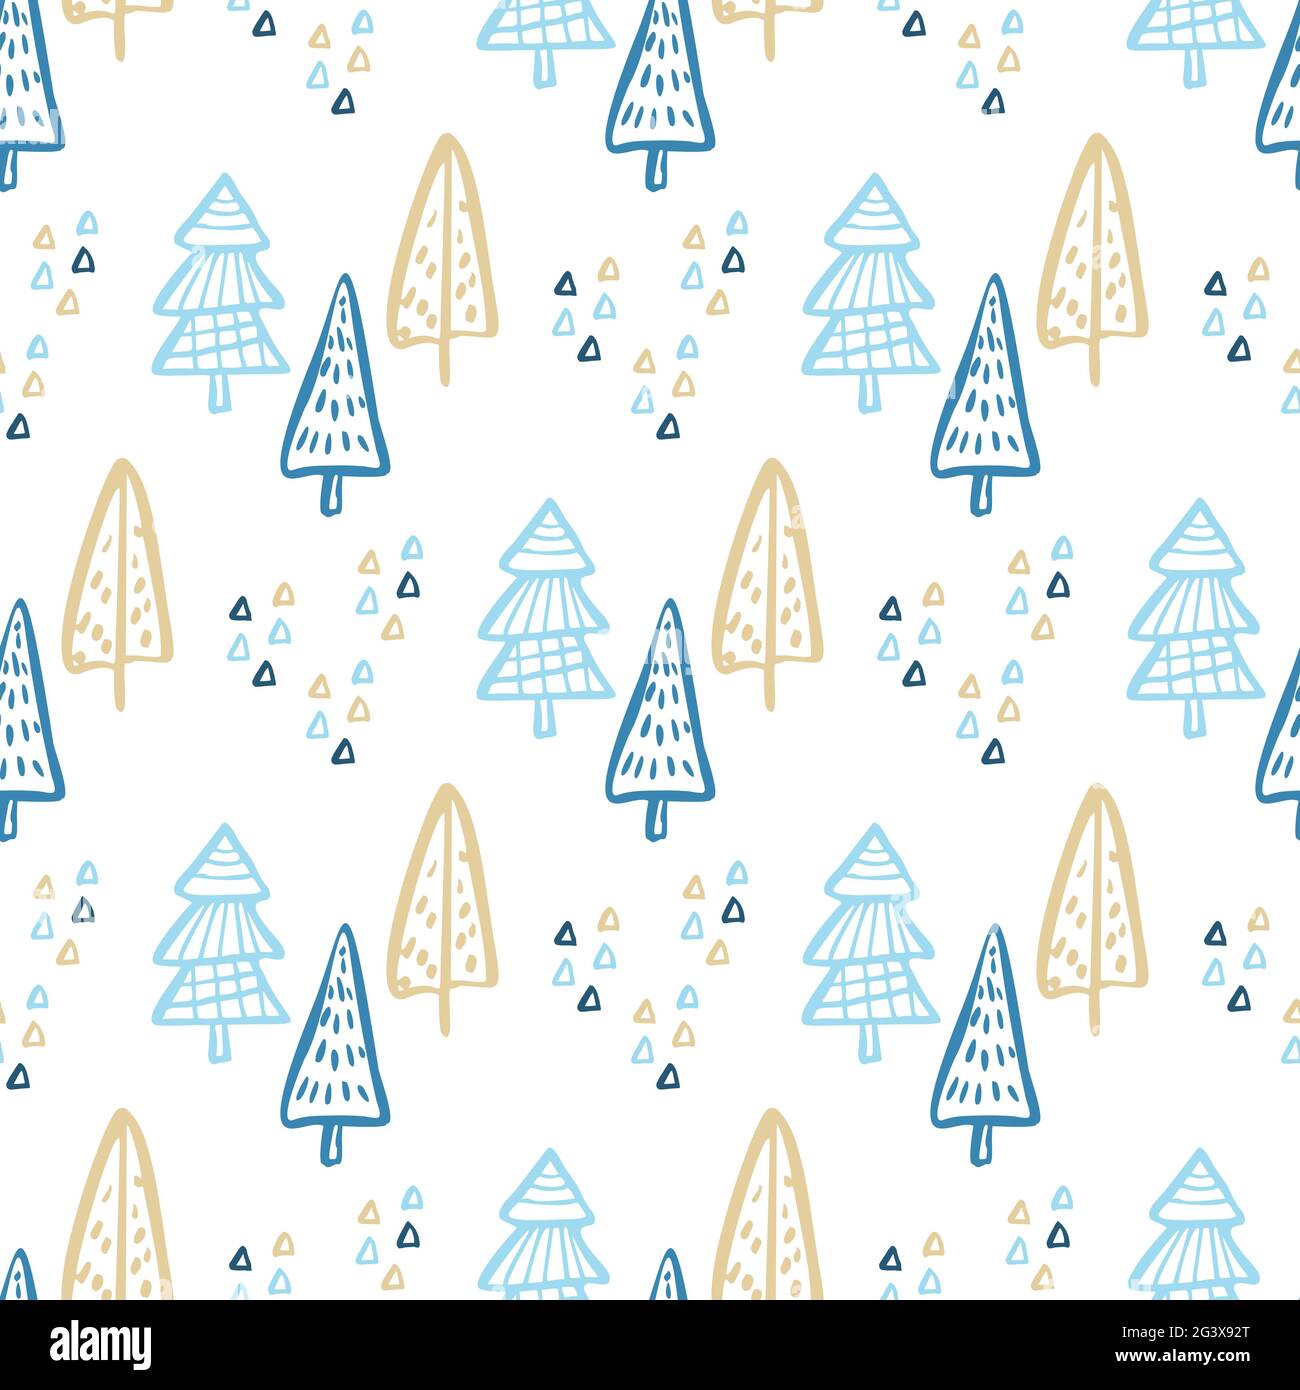 Christmas Tree Doodle Seamless Pattern. Winter Stylized Simple Fir Trees  Endless Design for Wrapping Paper, Scrapbooking, Textile and Wallpaper  Stock Vector Image & Art - Alamy